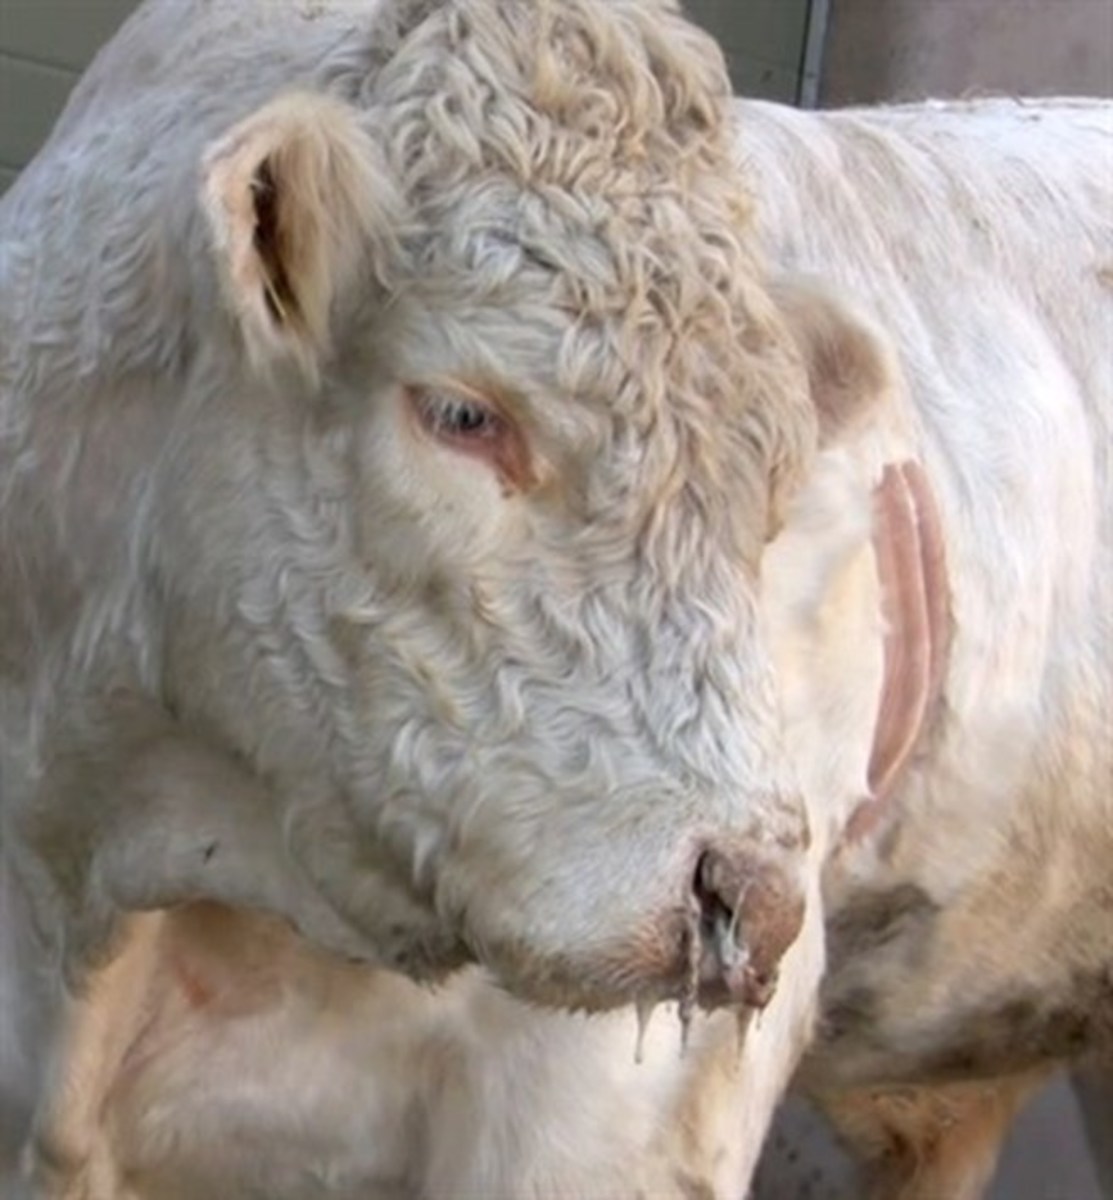 Respiratory symptoms in a Charolais bull with suspected IBR.